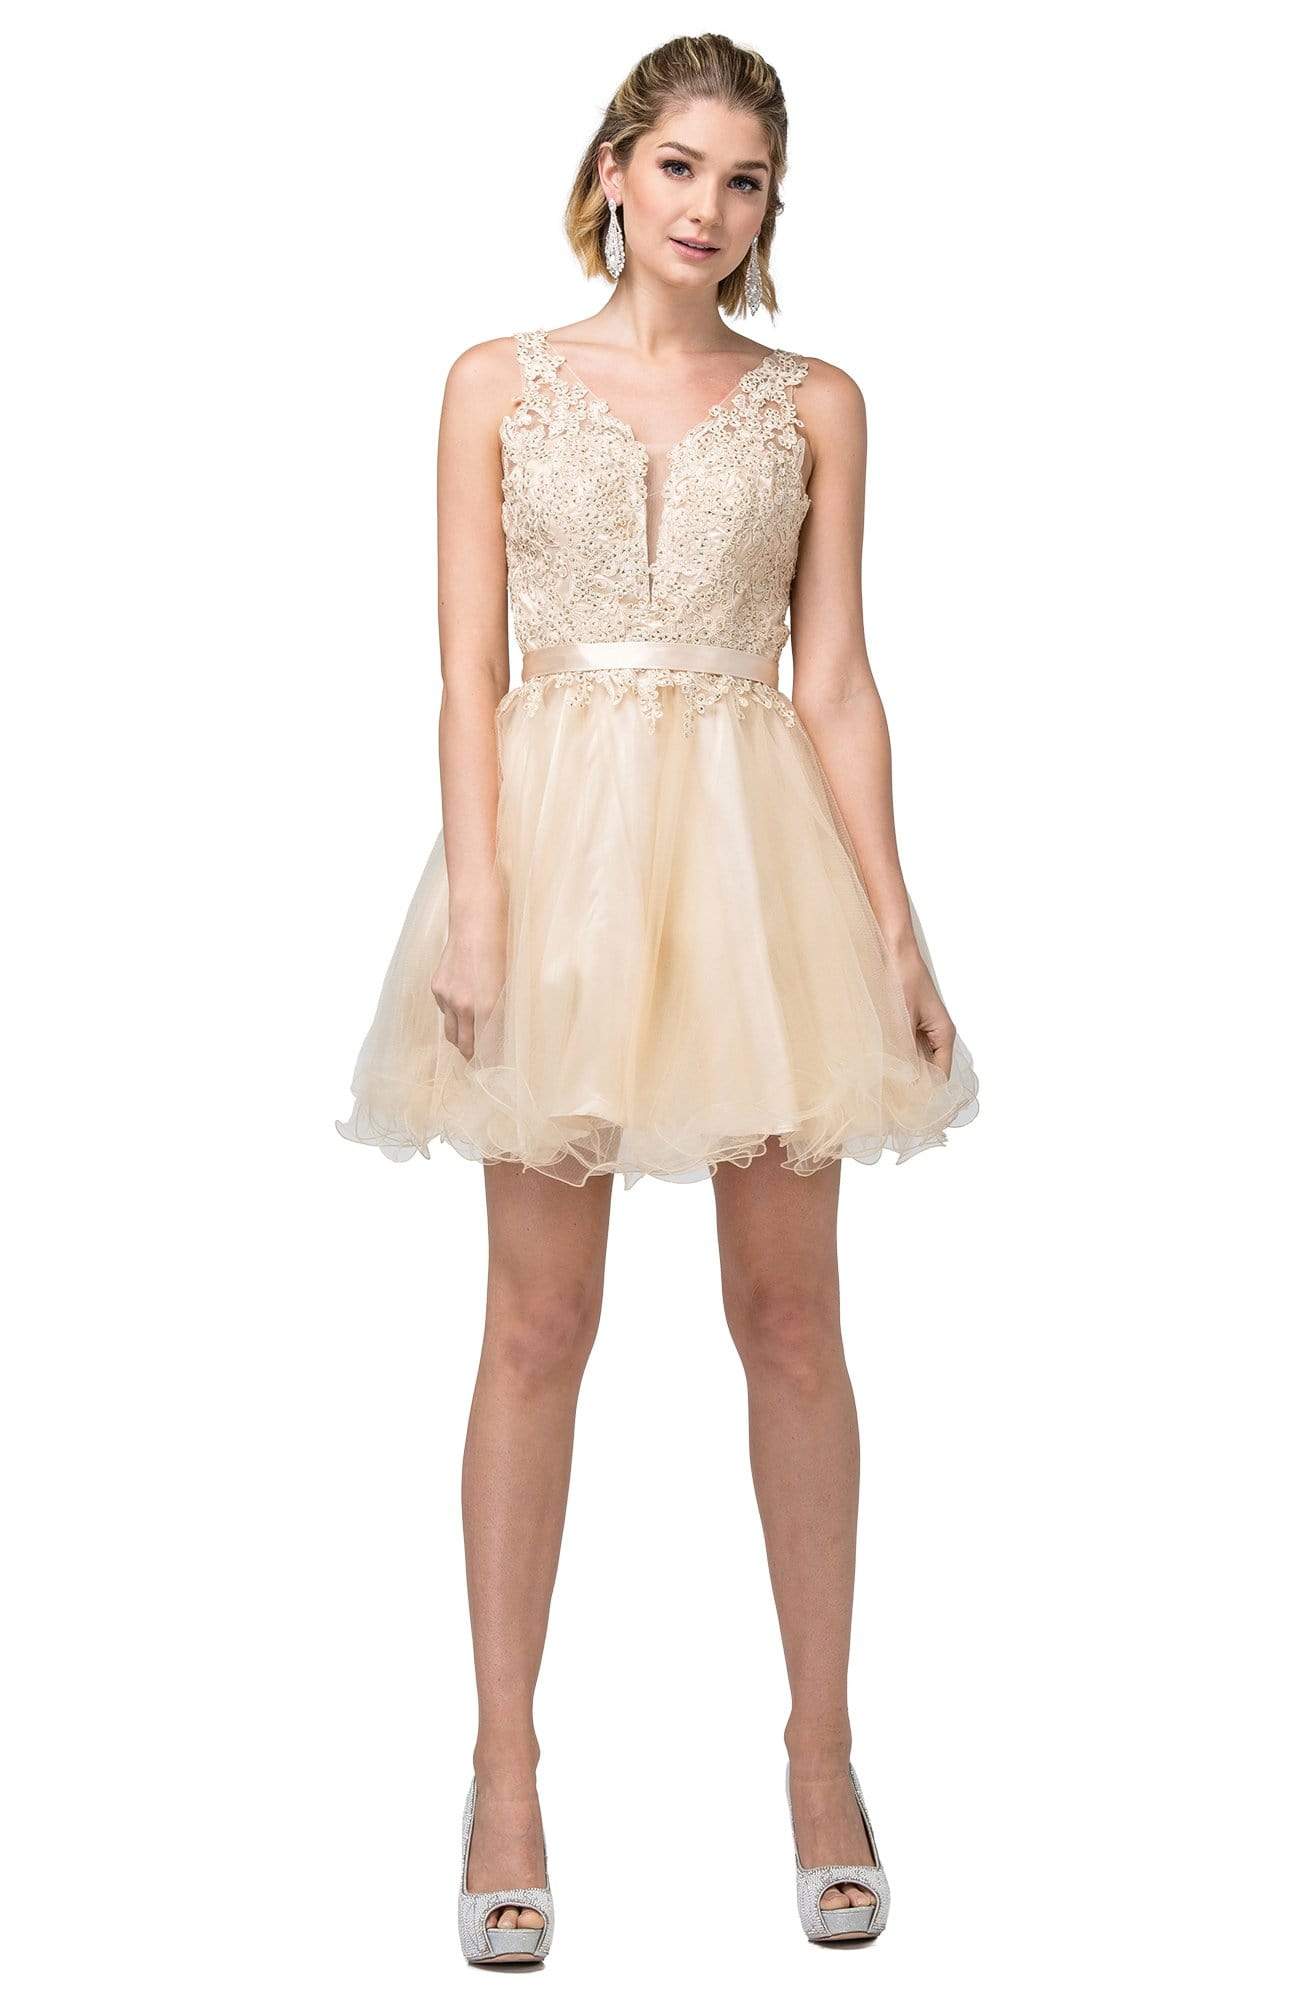 Dancing Queen - 3150 Appliqued Lace Bodice Tulle Dress
